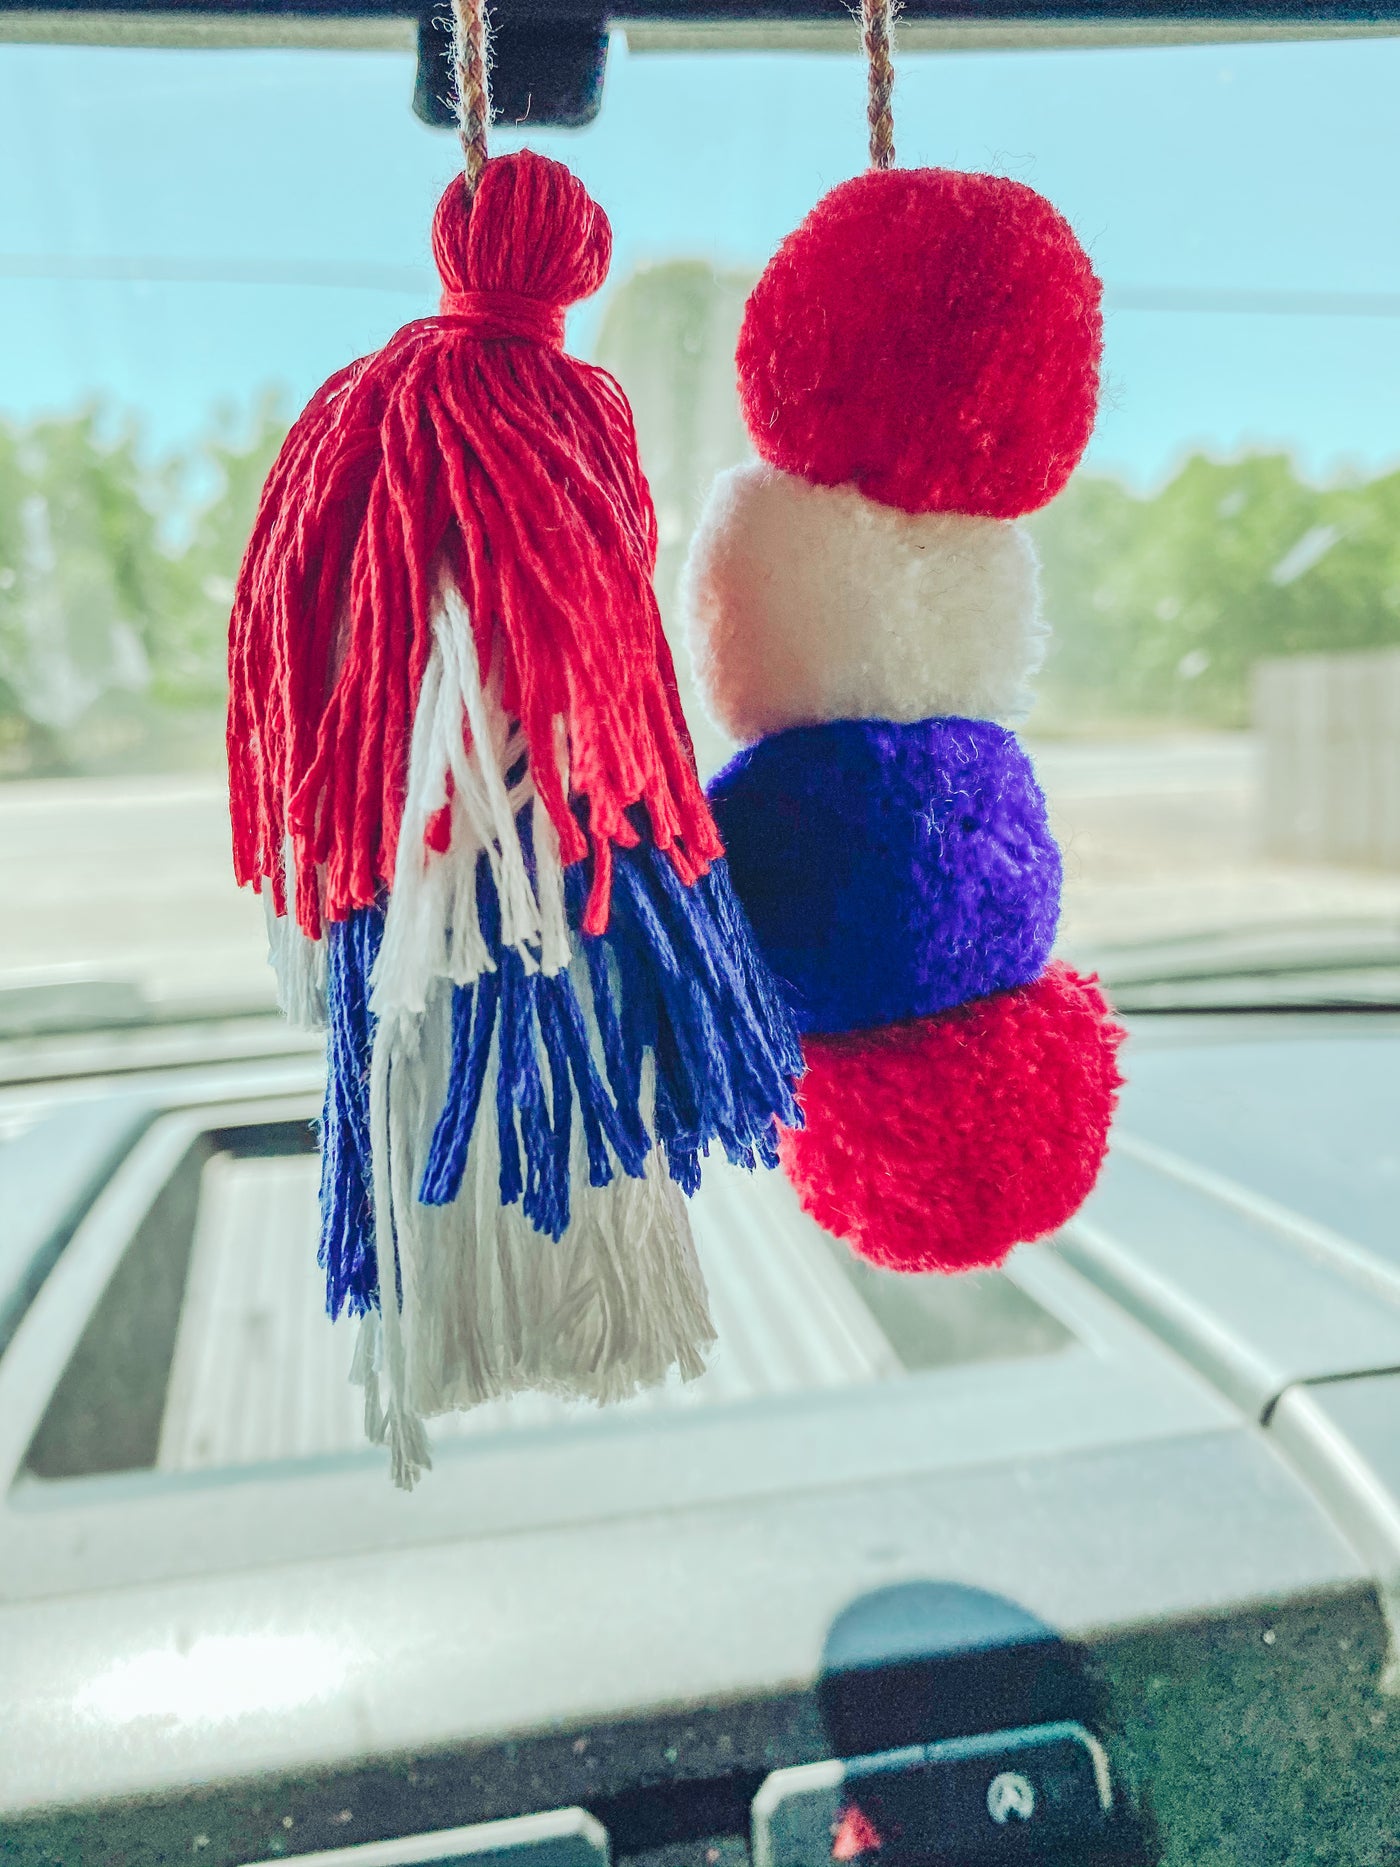 Red White & Blue Pom & Tassel - Rearview Mirror Hanger-401 CAR ACCESSORIES-Adelyn Elaine's-Adelyn Elaine's Boutique, Women's Clothing Boutique in Gilmer, TX